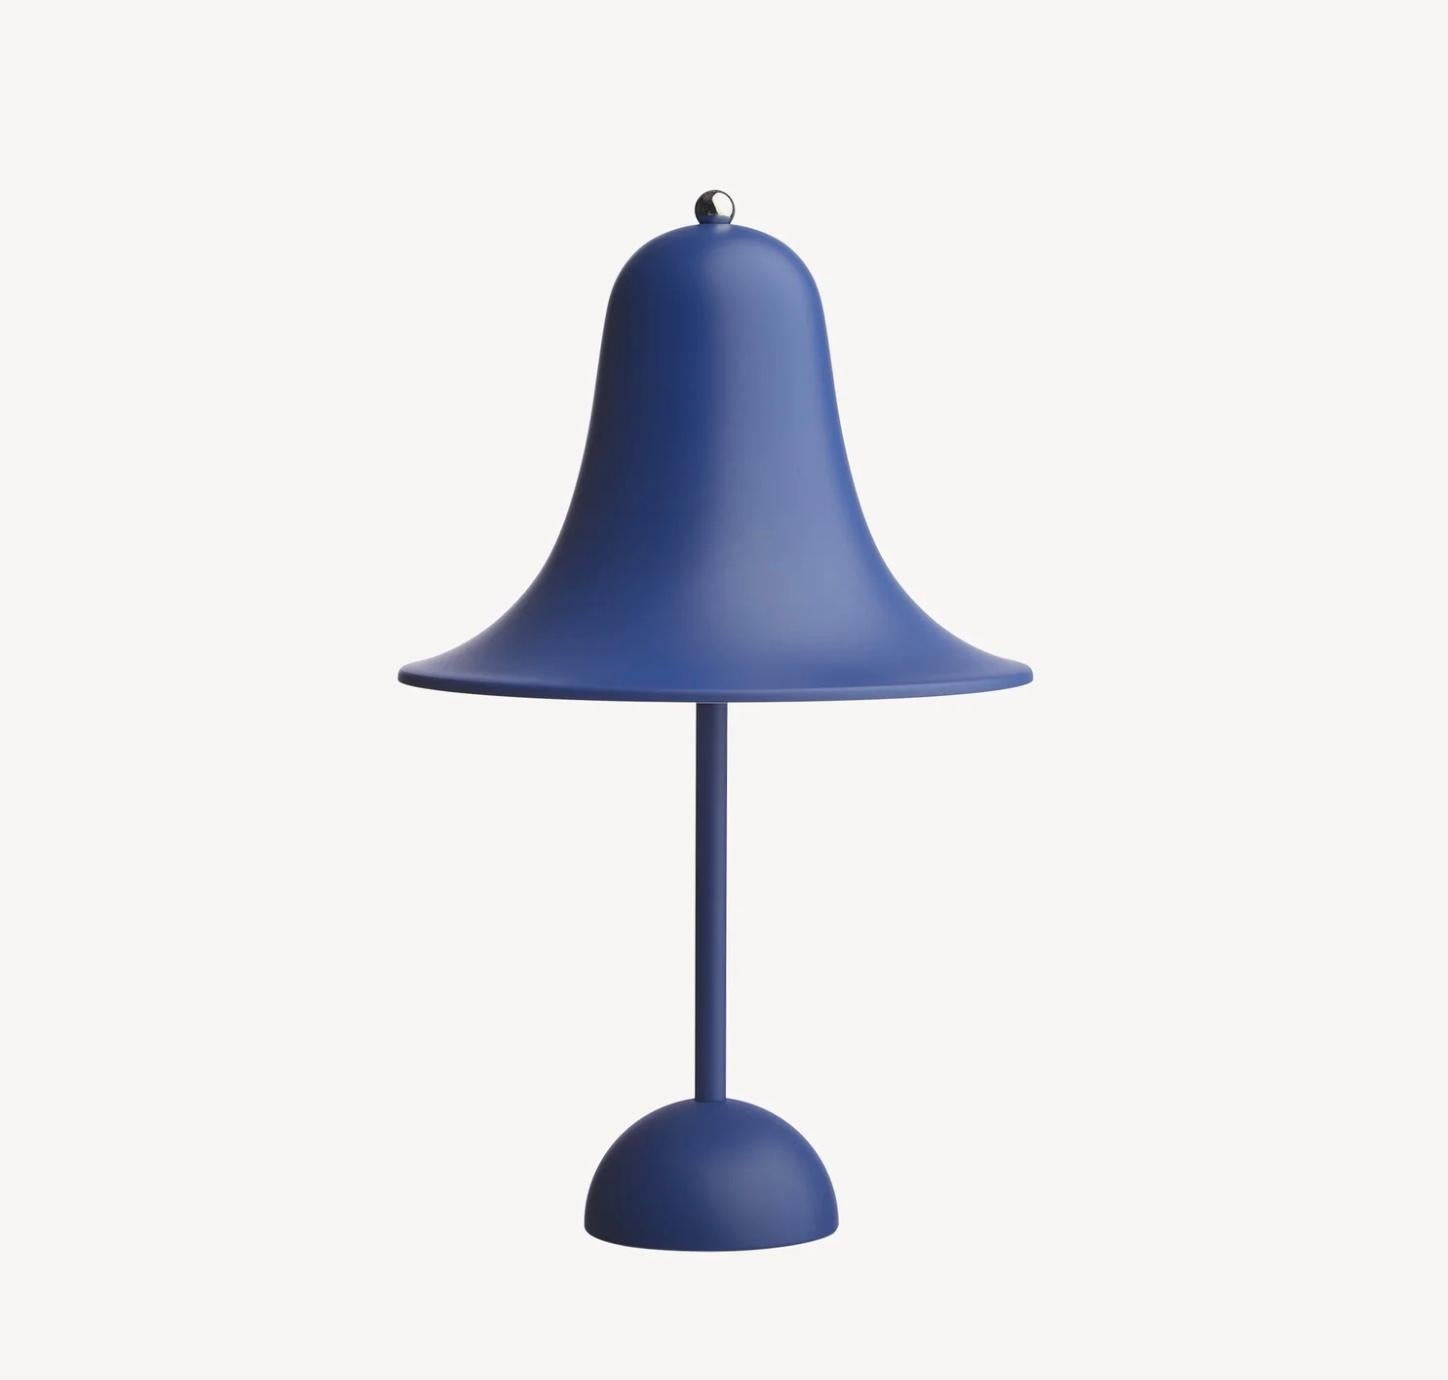 Contemporary Verner Panton 'Pantop' Table Lamp in 'Dusty Blue' 1980 for Verpan For Sale